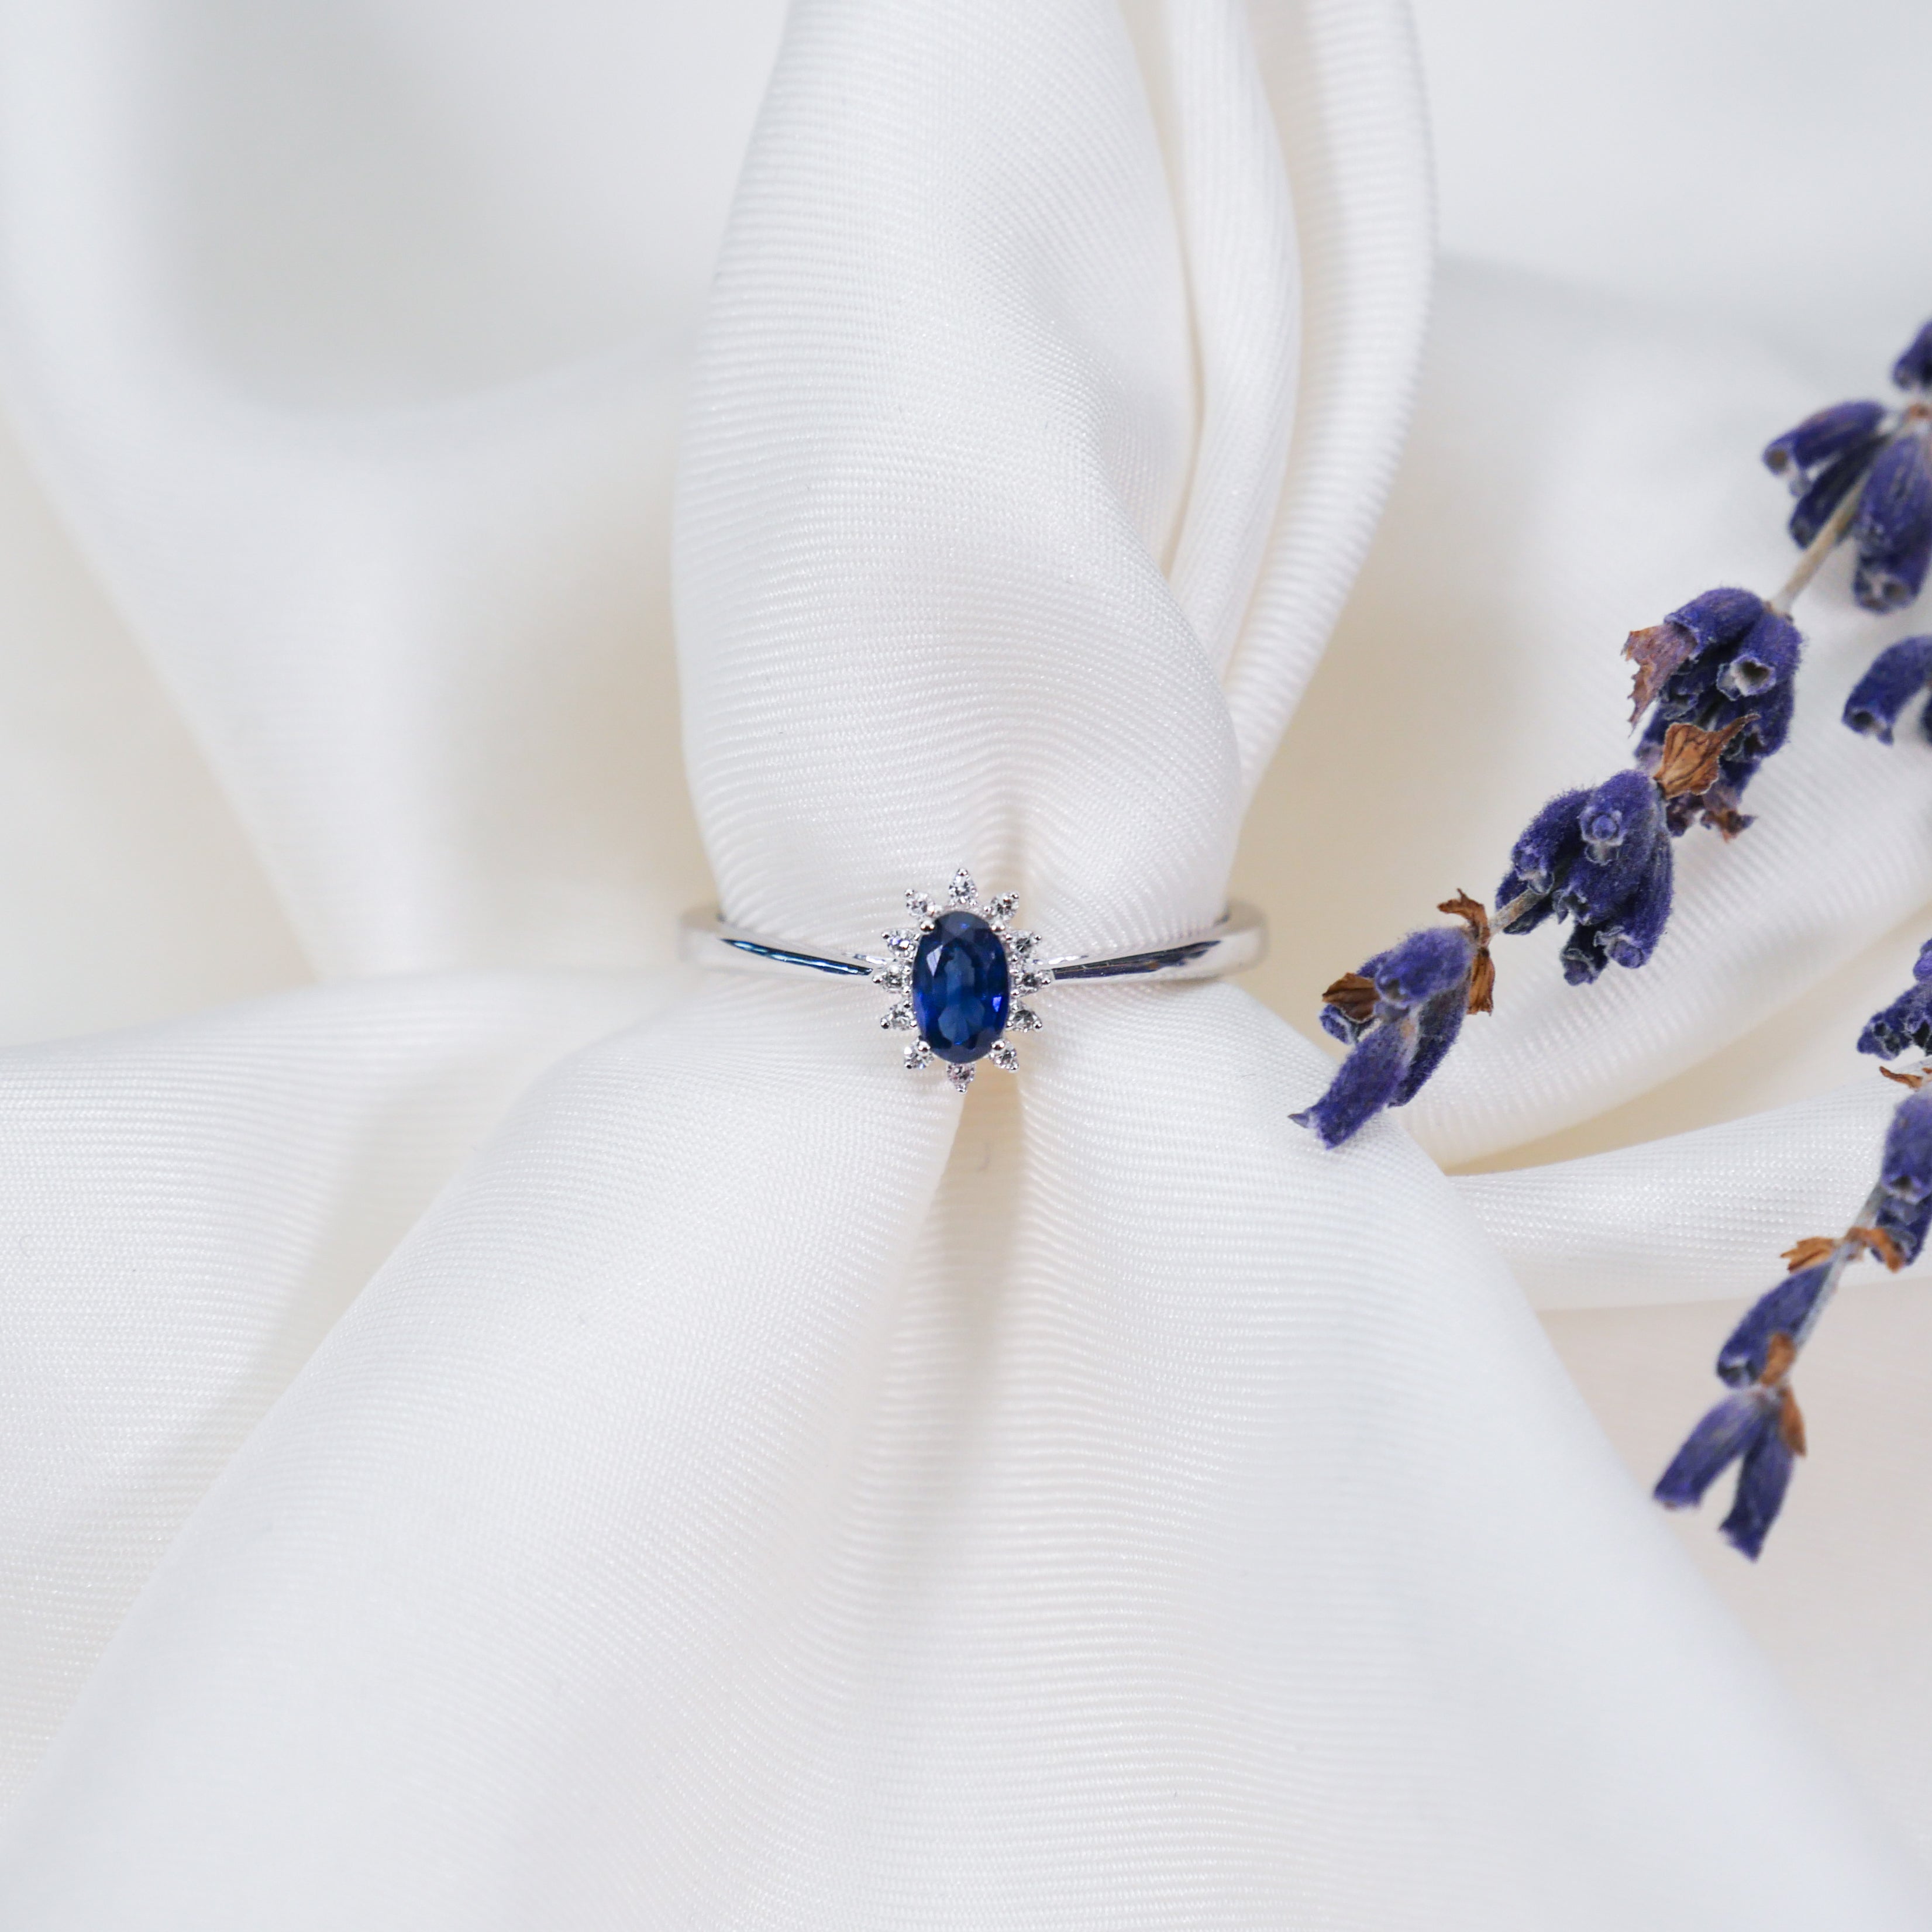 Natural Blue Sapphire With Emerald-Cut Diamonds In White Gold Trilogy Ring  - Cara Jewellers